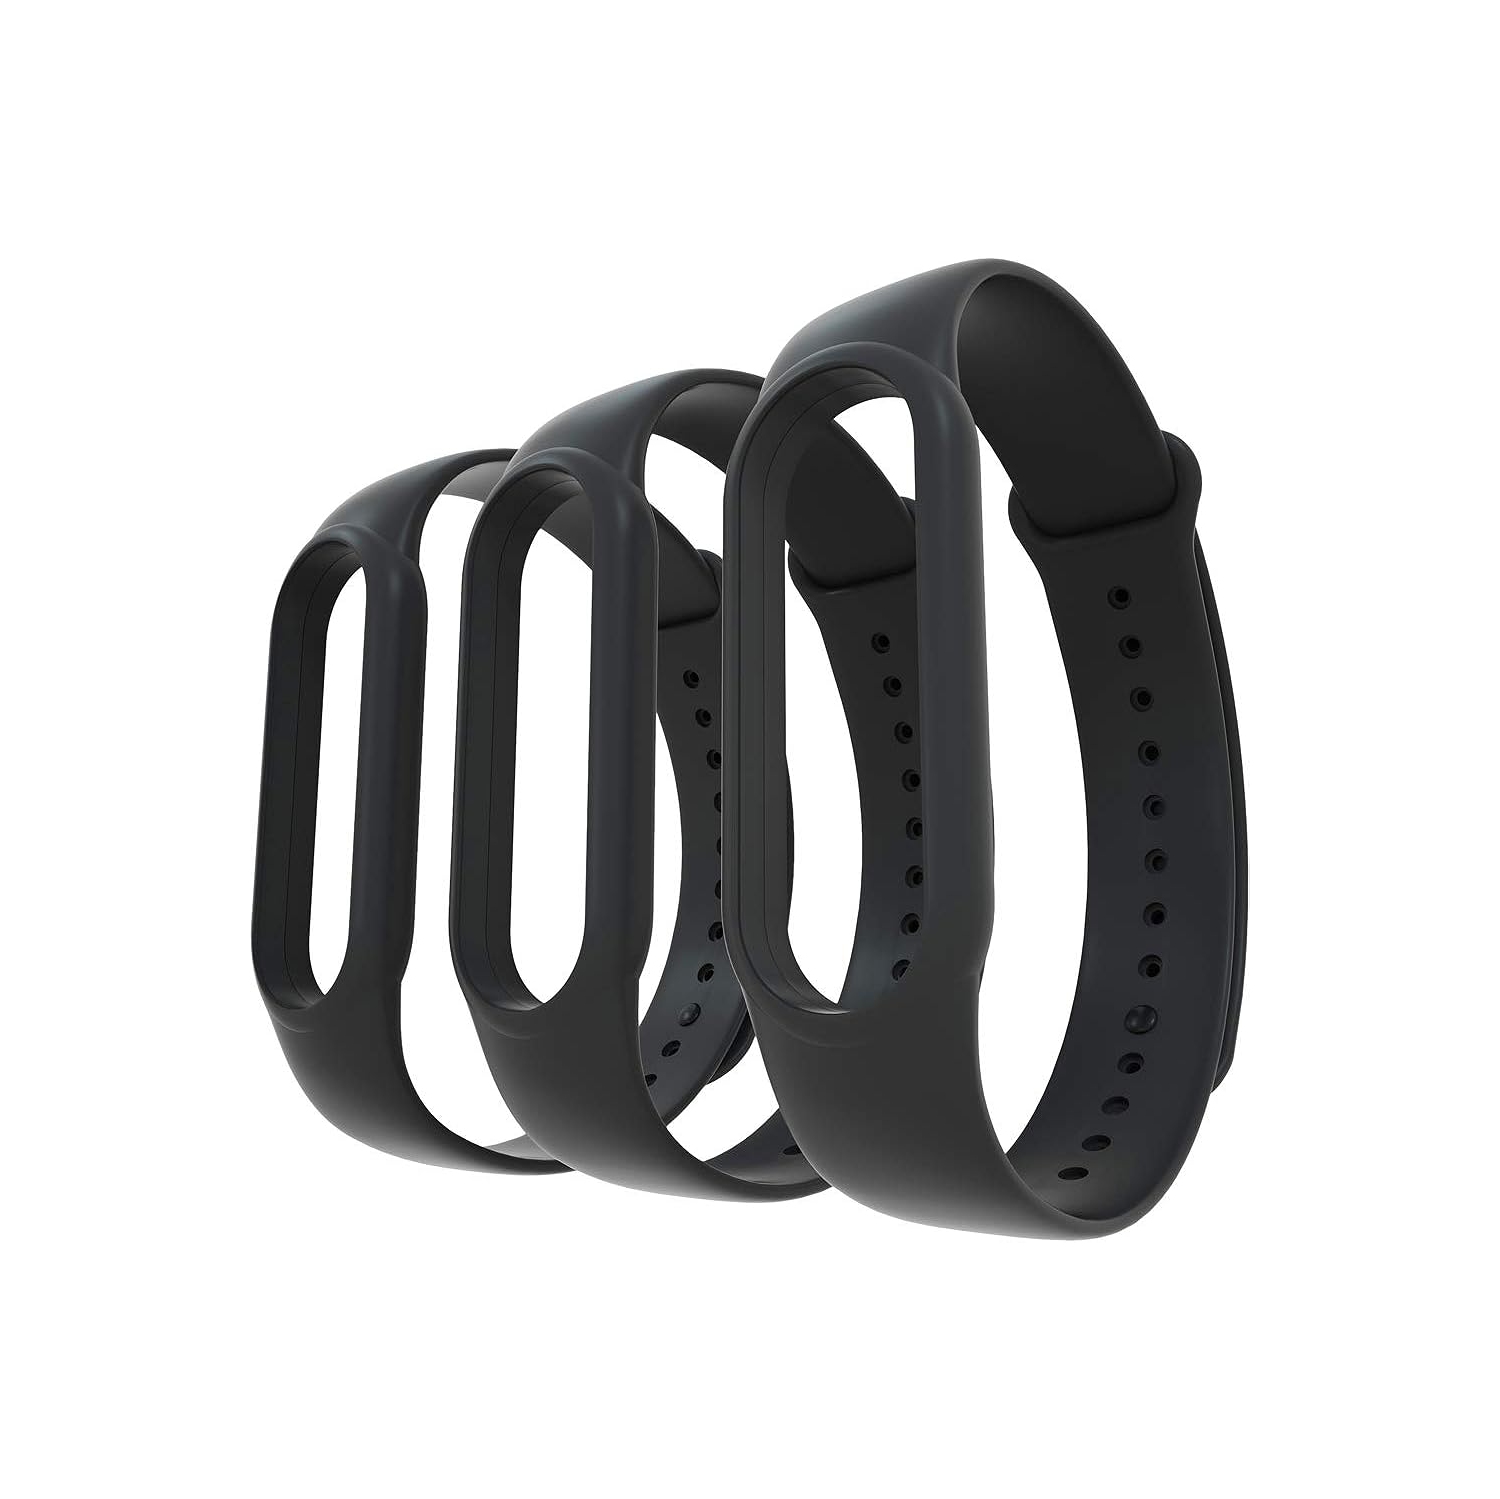 Bands Compatible With Xiaomi Mi Band 5 &6 Smartwatch Wristbands Replacement Band Accessaries Straps Bracelets